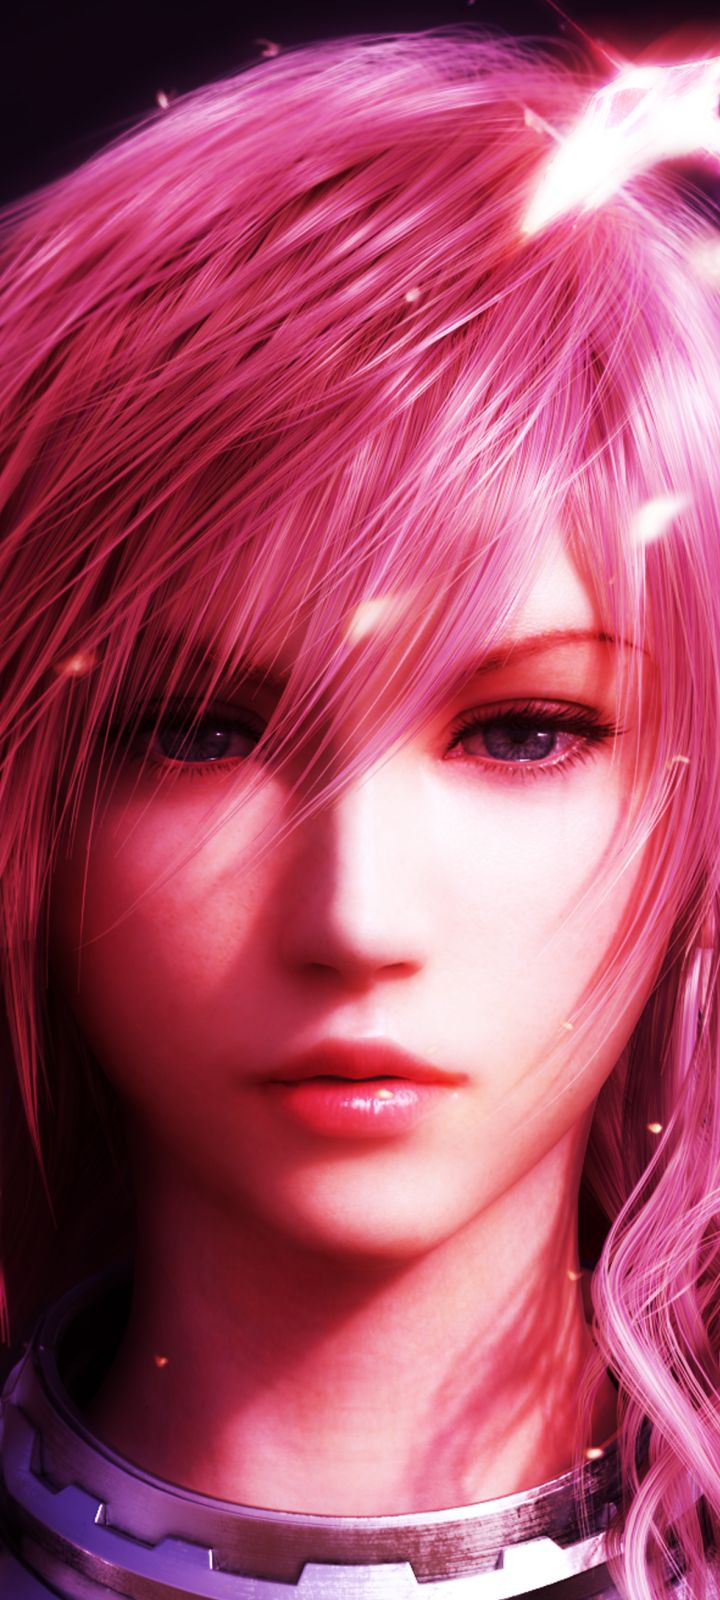 video game, final fantasy xiii 2, pink hair, final fantasy xiii, final fantasy